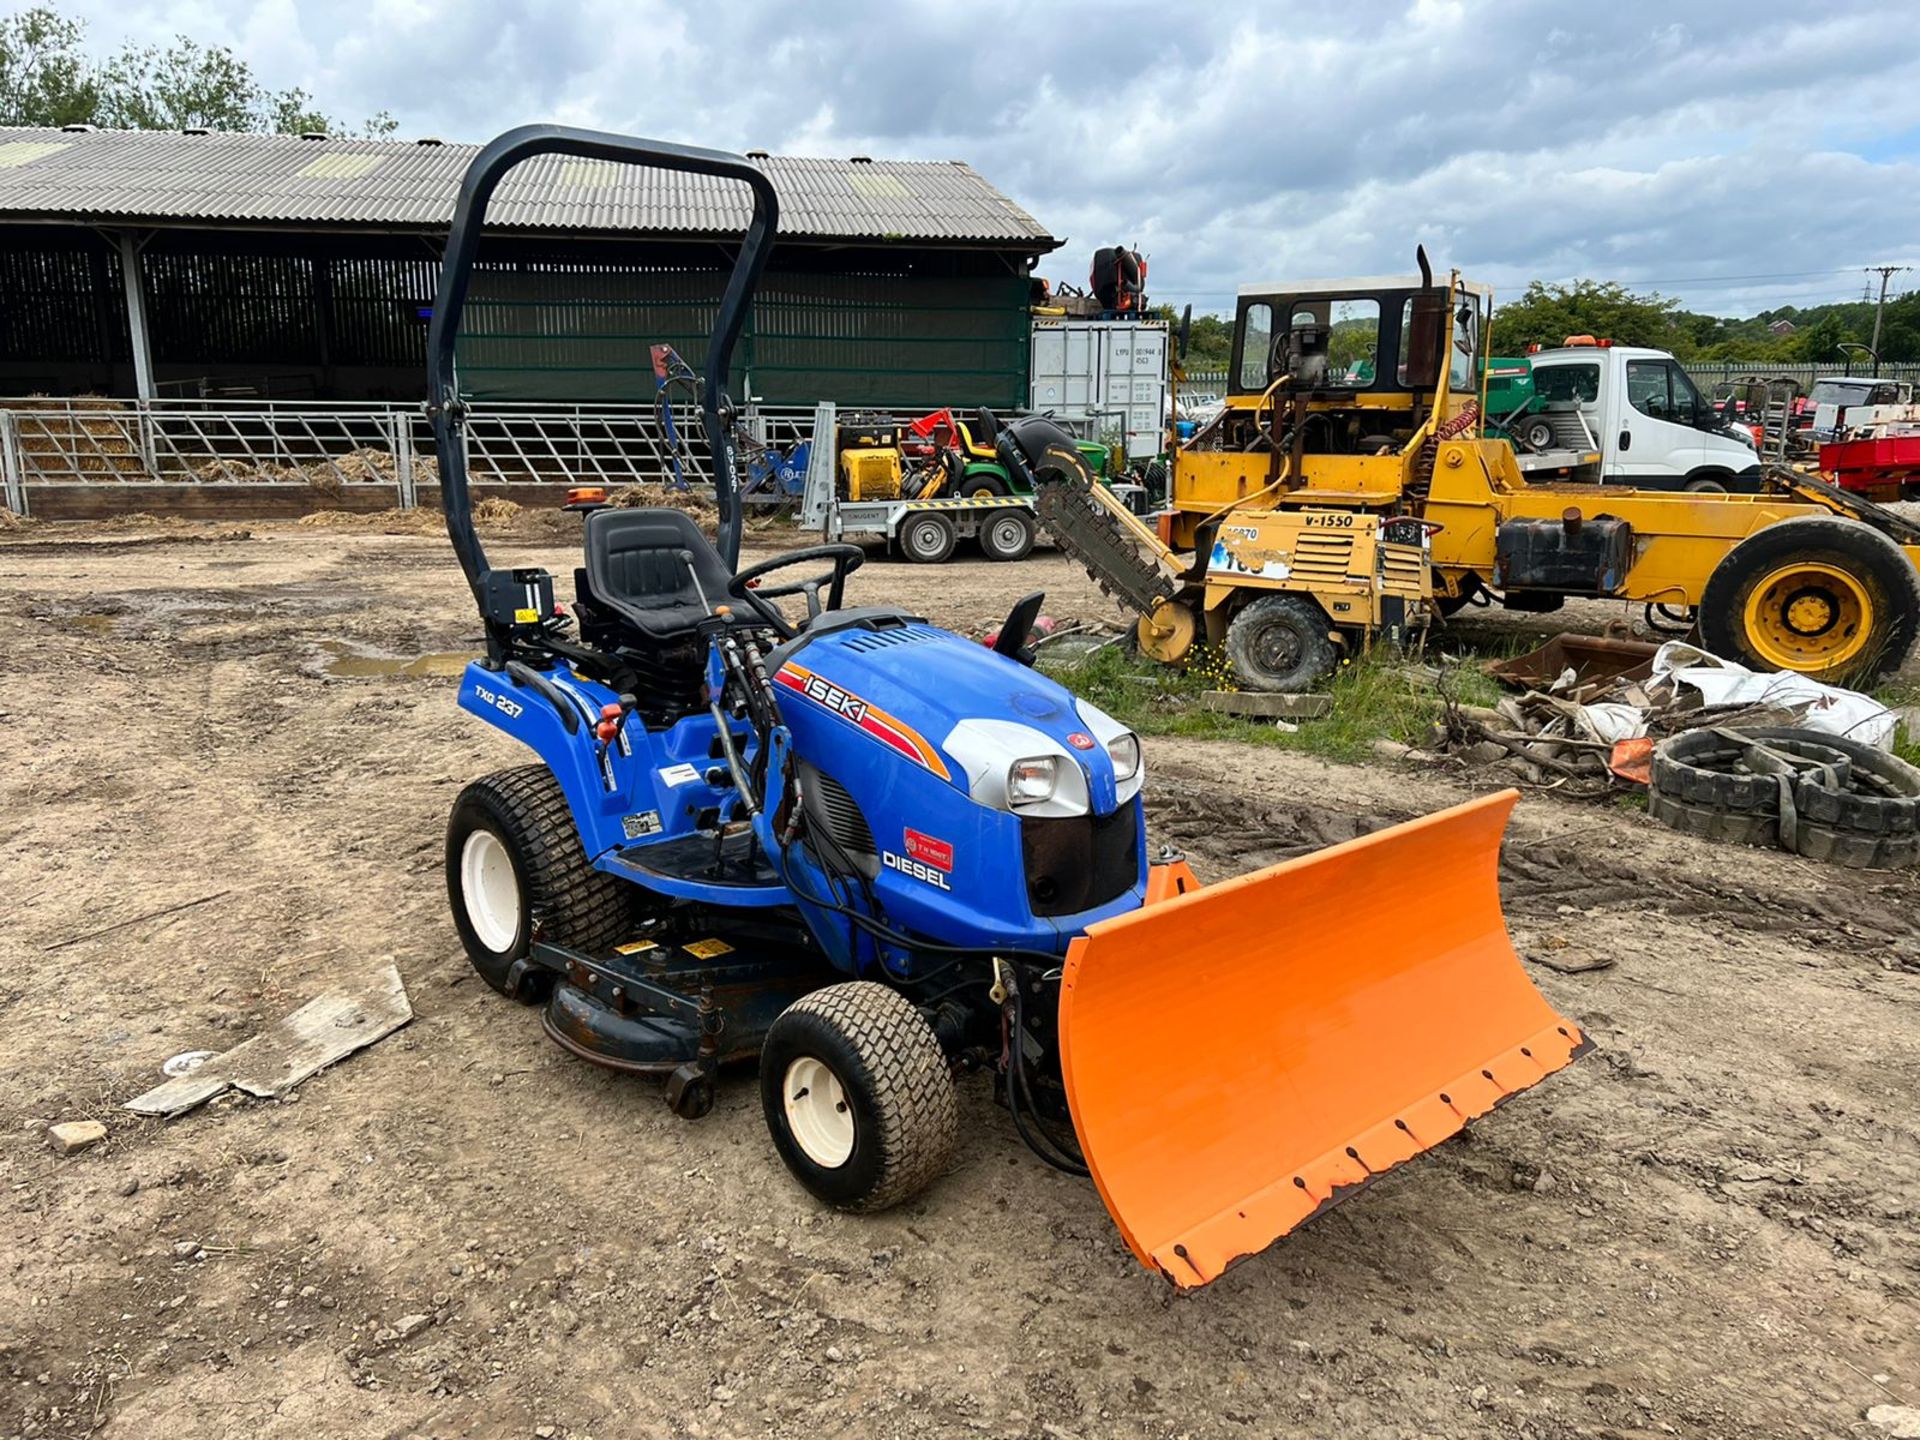 2012 ISEKI TXG237 4WD COMPACT TRACTOR WITH 54" UNDERSLUNG DECK AND FRONT SNOW BLADE *PLUS VAT* - Image 2 of 20